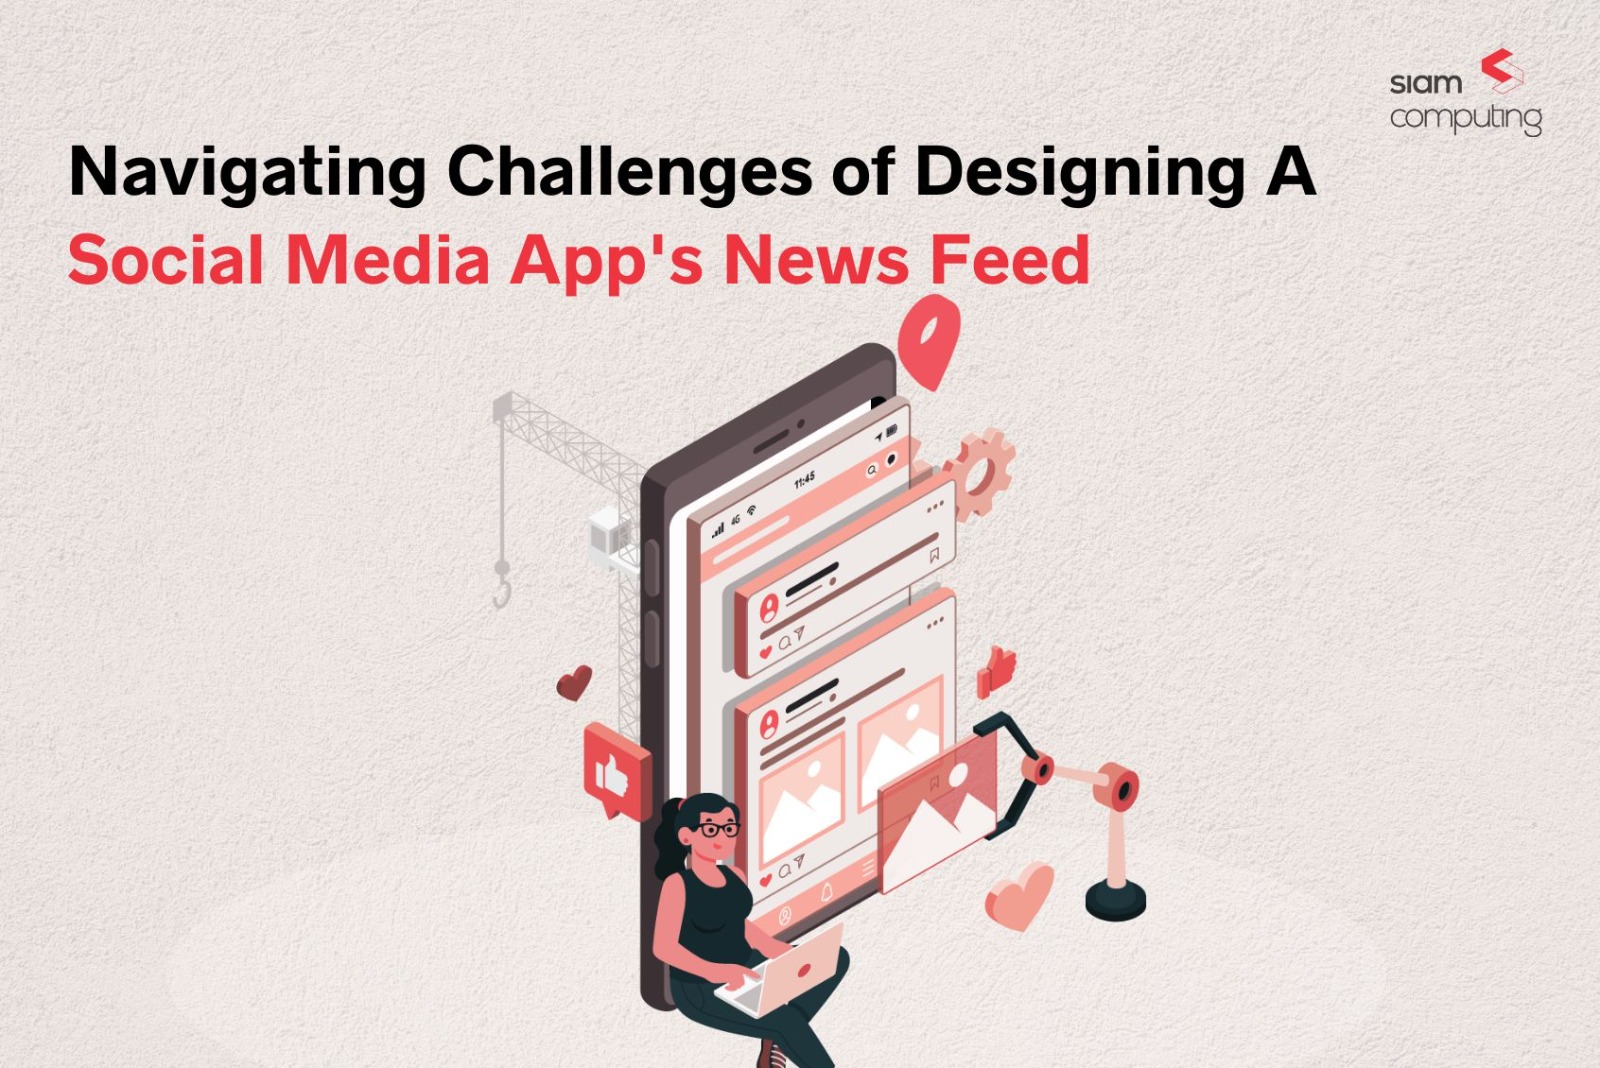 Navigating Challenges of Designing a Social Media App's News Feed